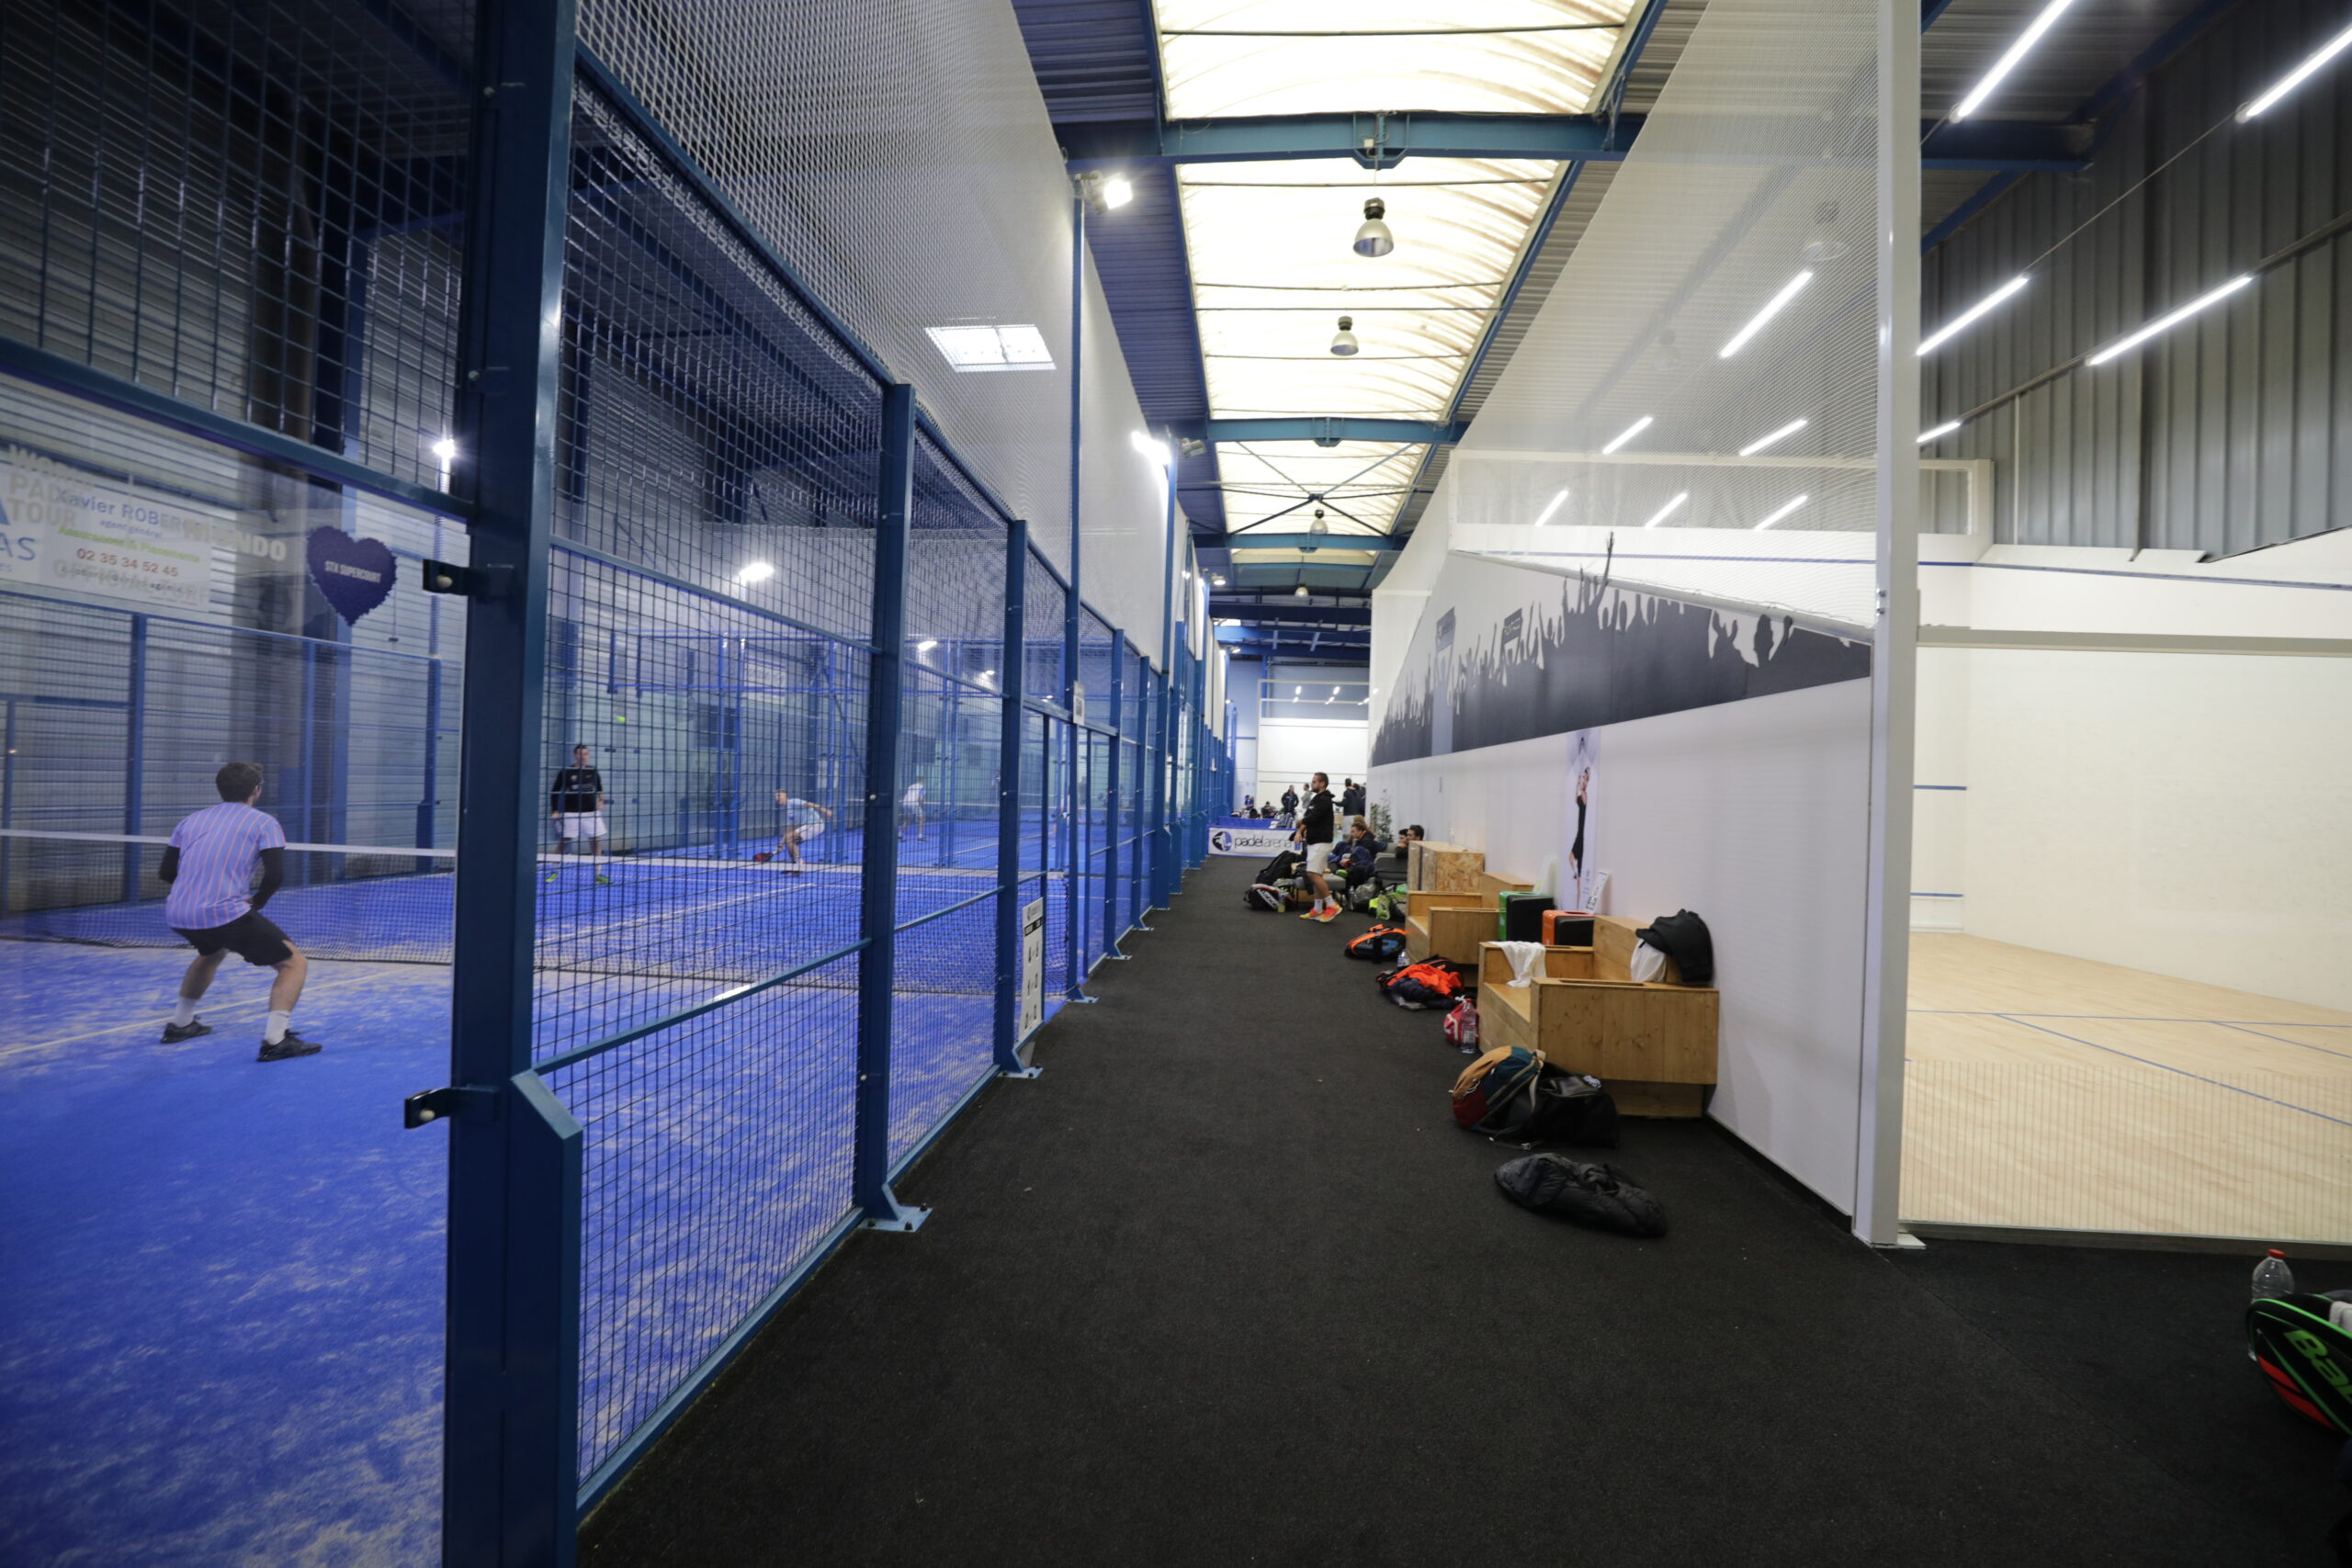 The results of the Open Padel Arena / BMW Horizon live